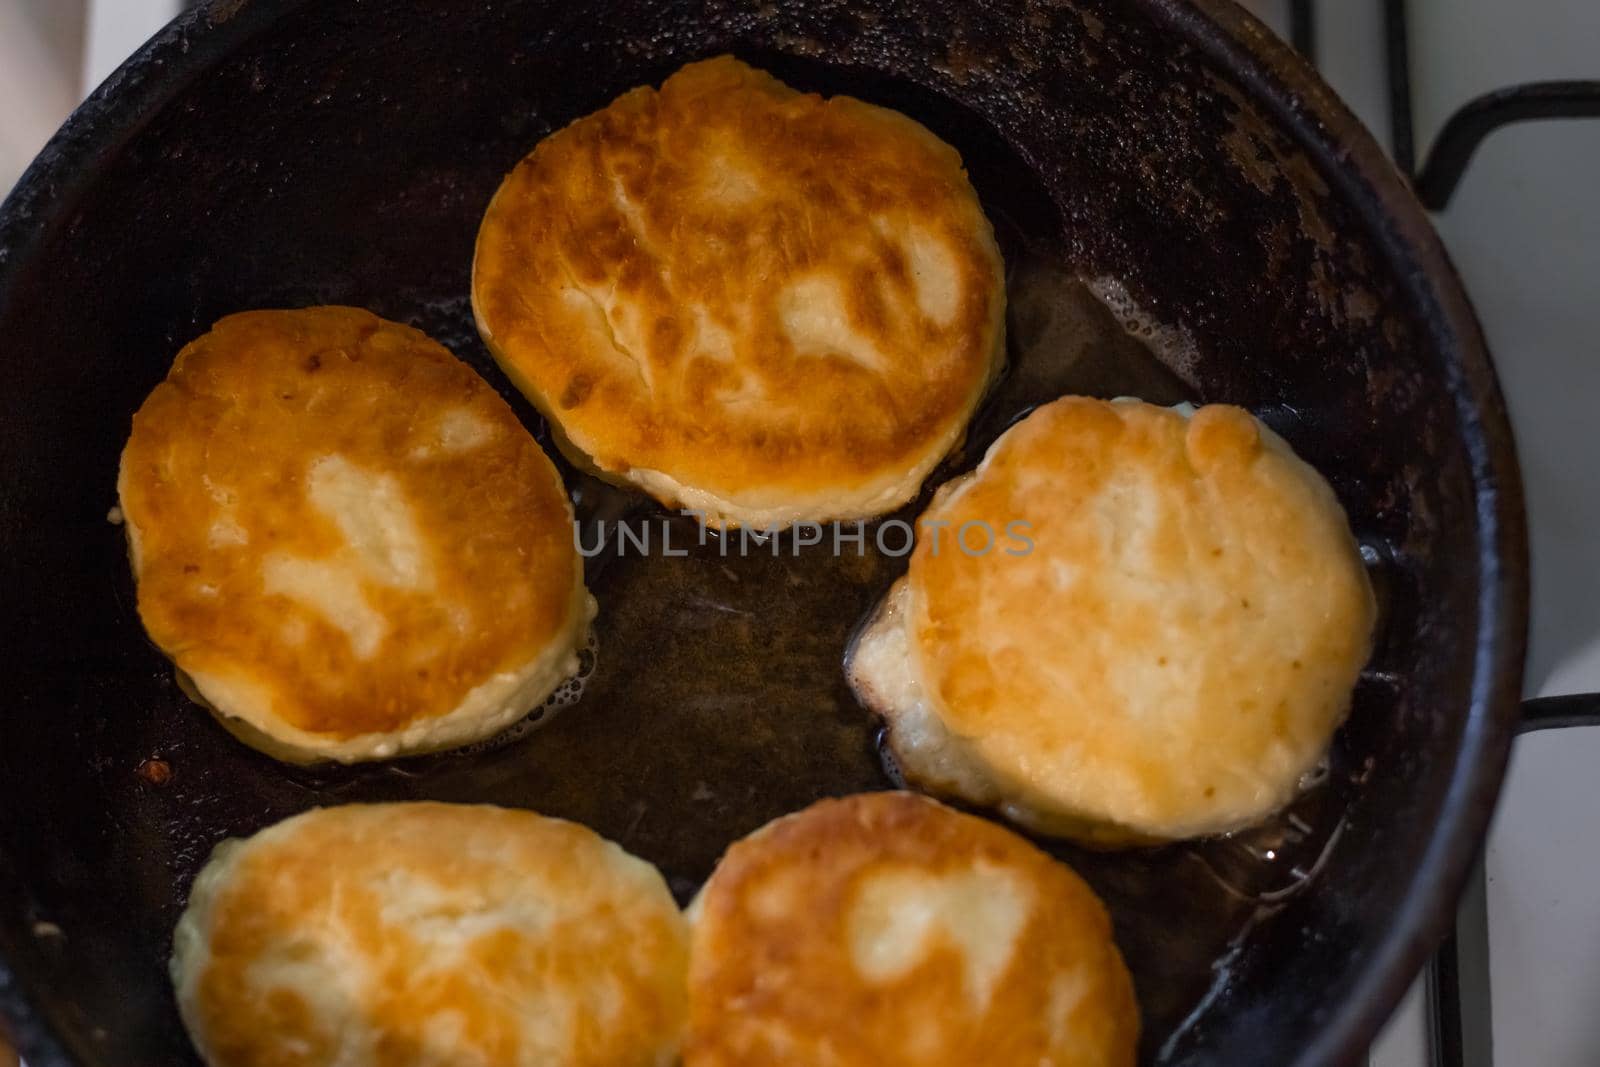 Freshly fried pancakes are prepared for breakfast. Cooking food in the kitchen.